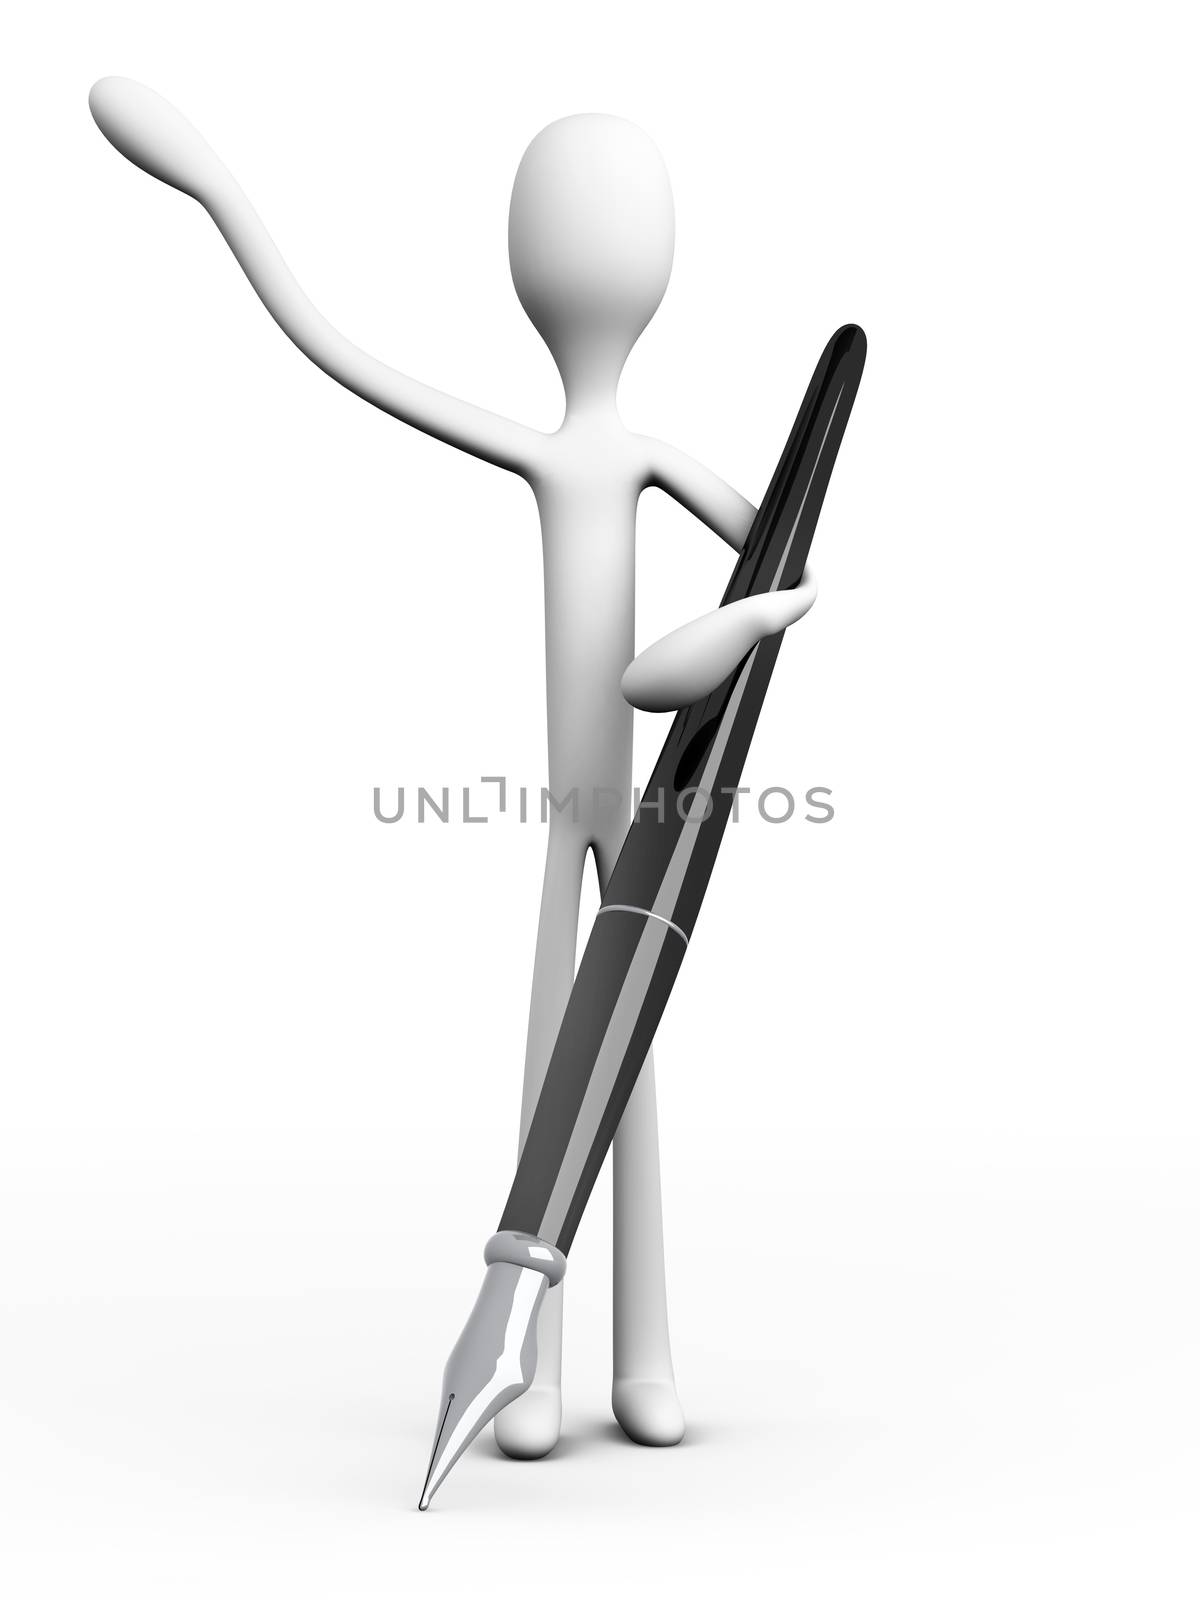 A cartoon figurine welcoming you to sign up. 3D rendered illustration. Isolated on white.